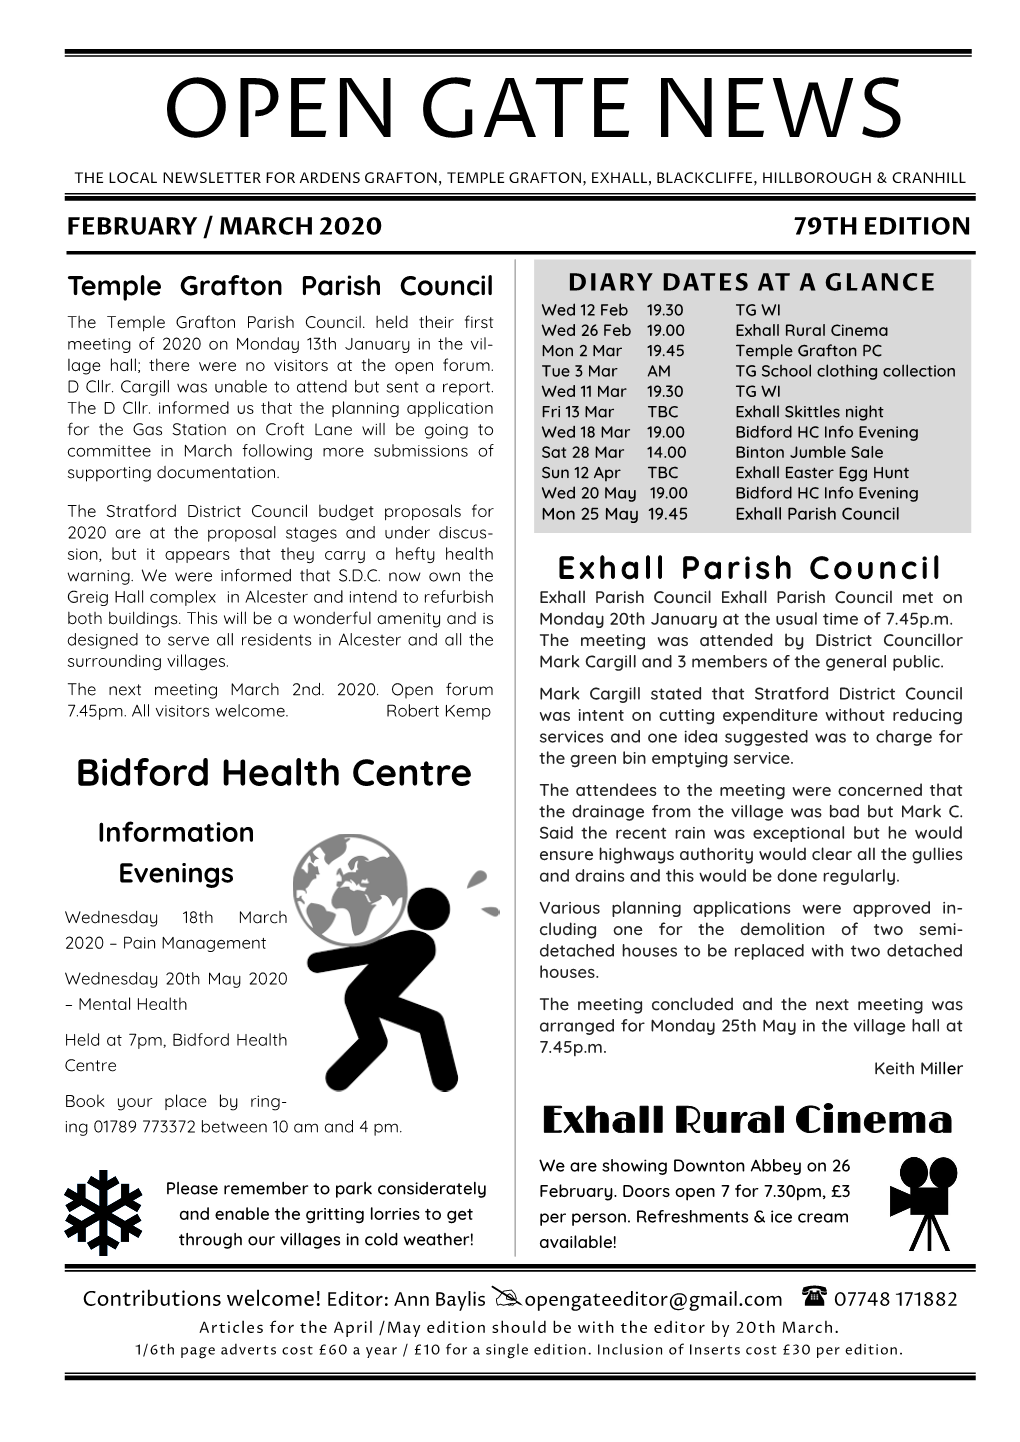 Open Gate News the Local Newsletter for Ardens Grafton, Temple Grafton, Exhall, Blackcliffe, Hillborough & Cranhill